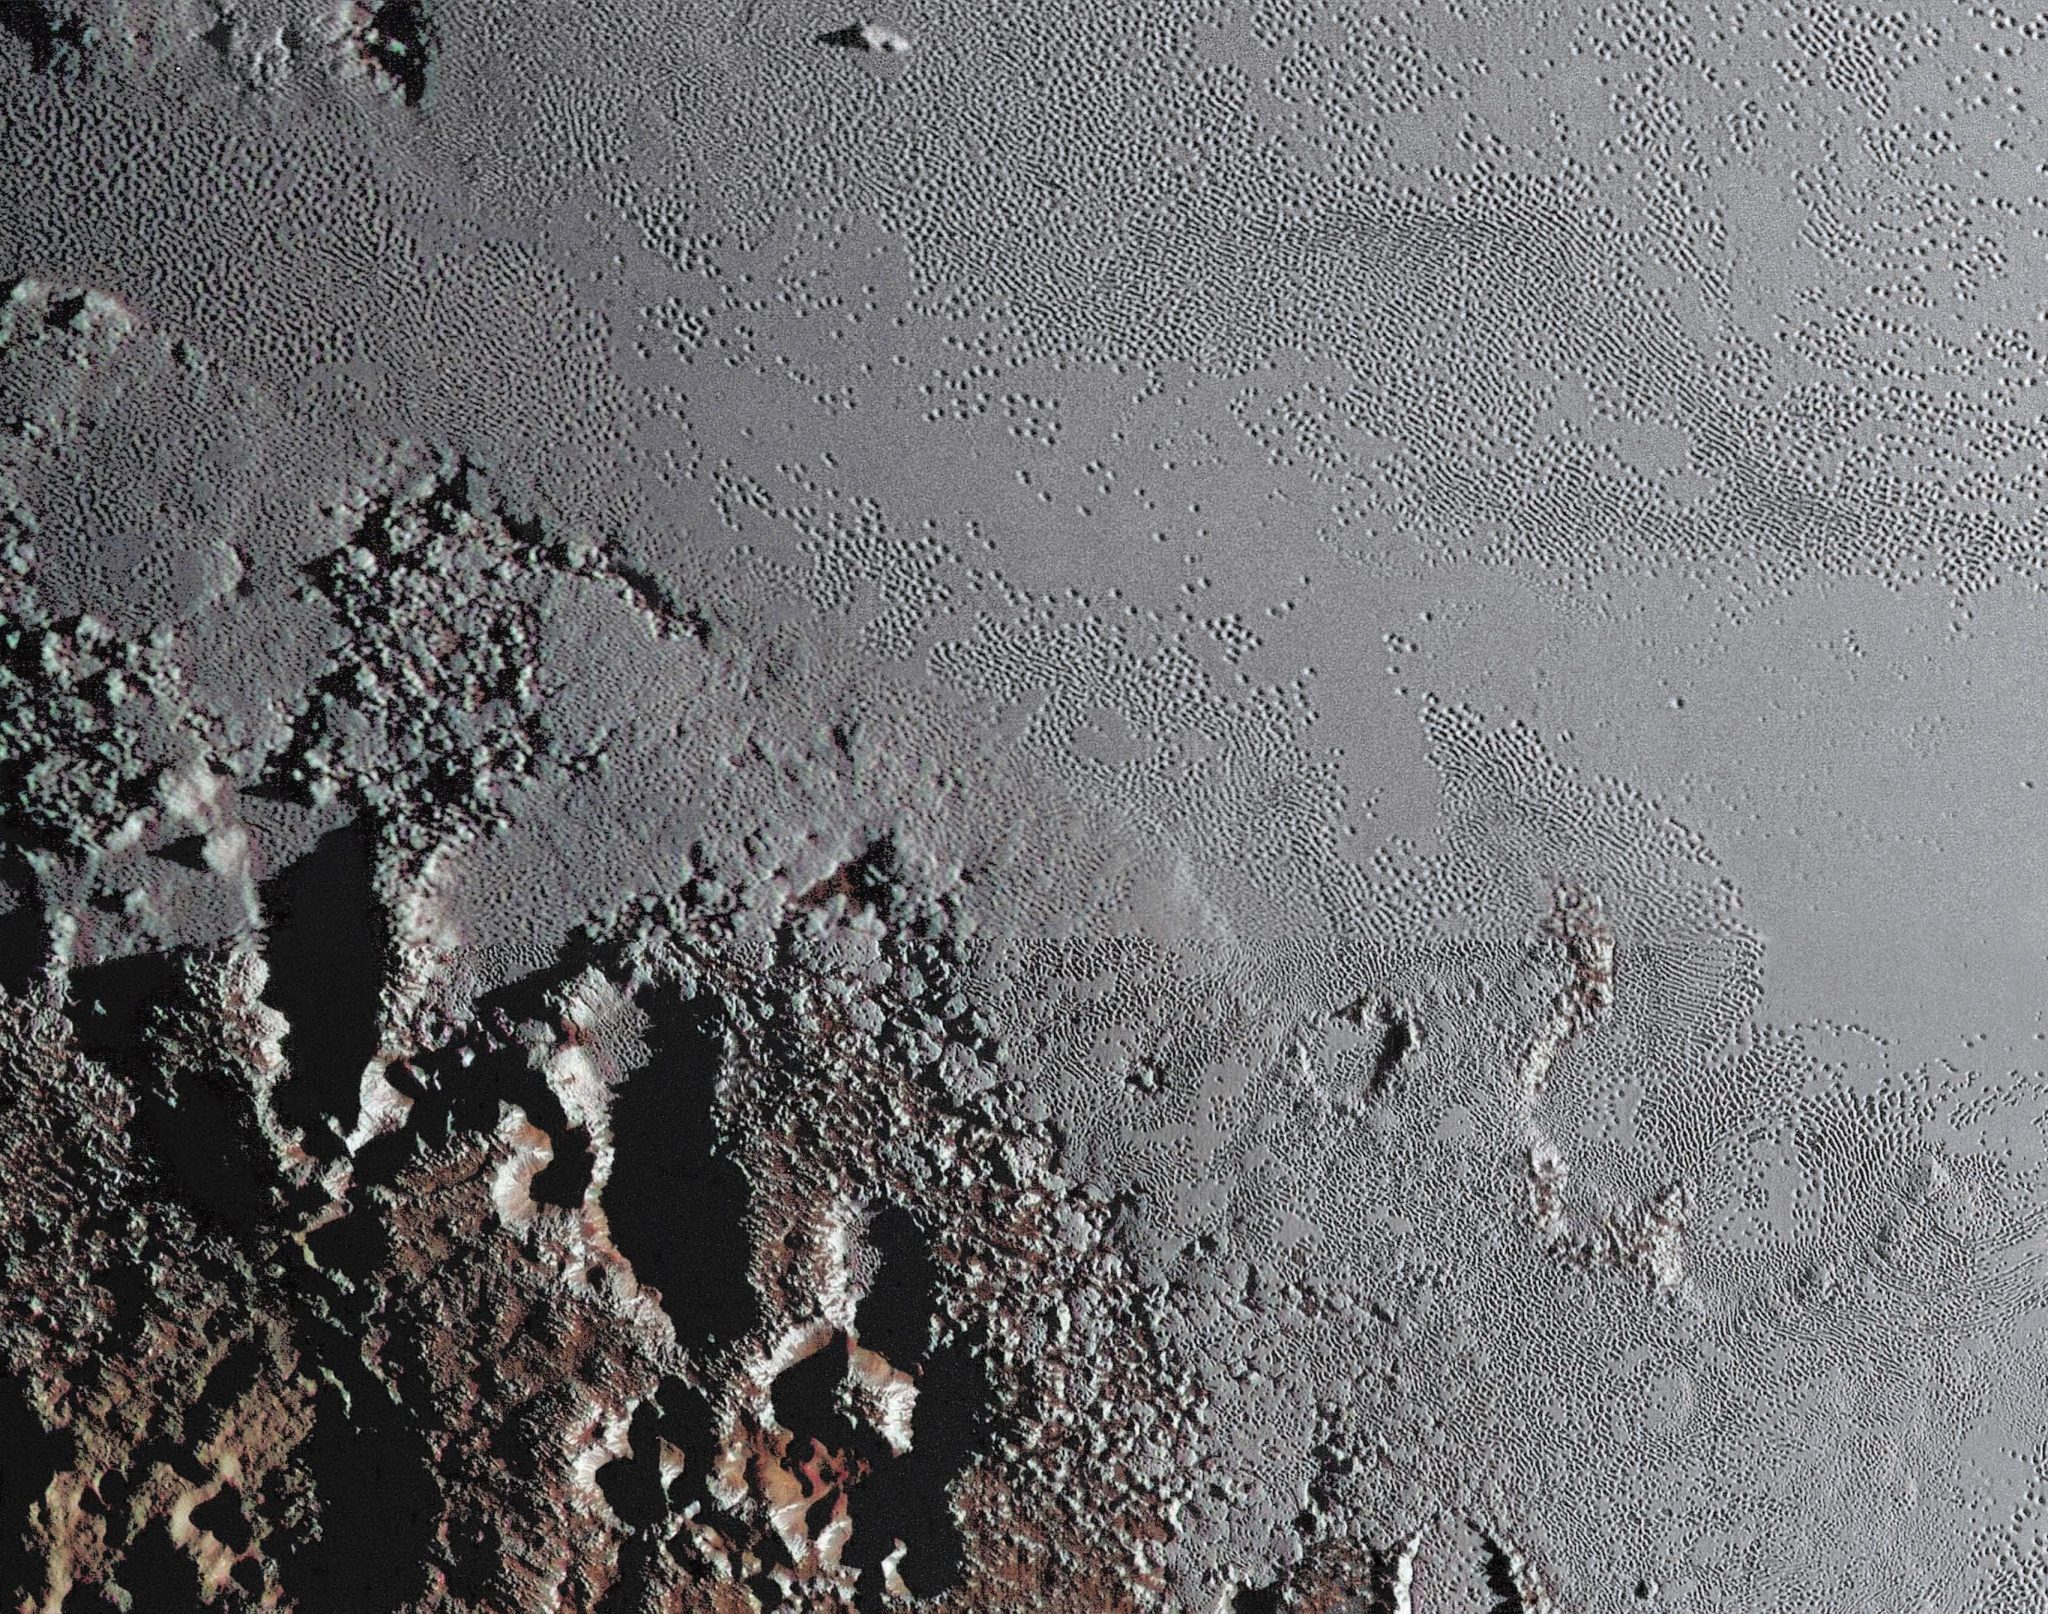 NASA’s New Horizons spacecraft zooms in on the southeastern portion of Pluto’s great ice plains, where at lower right the plains.